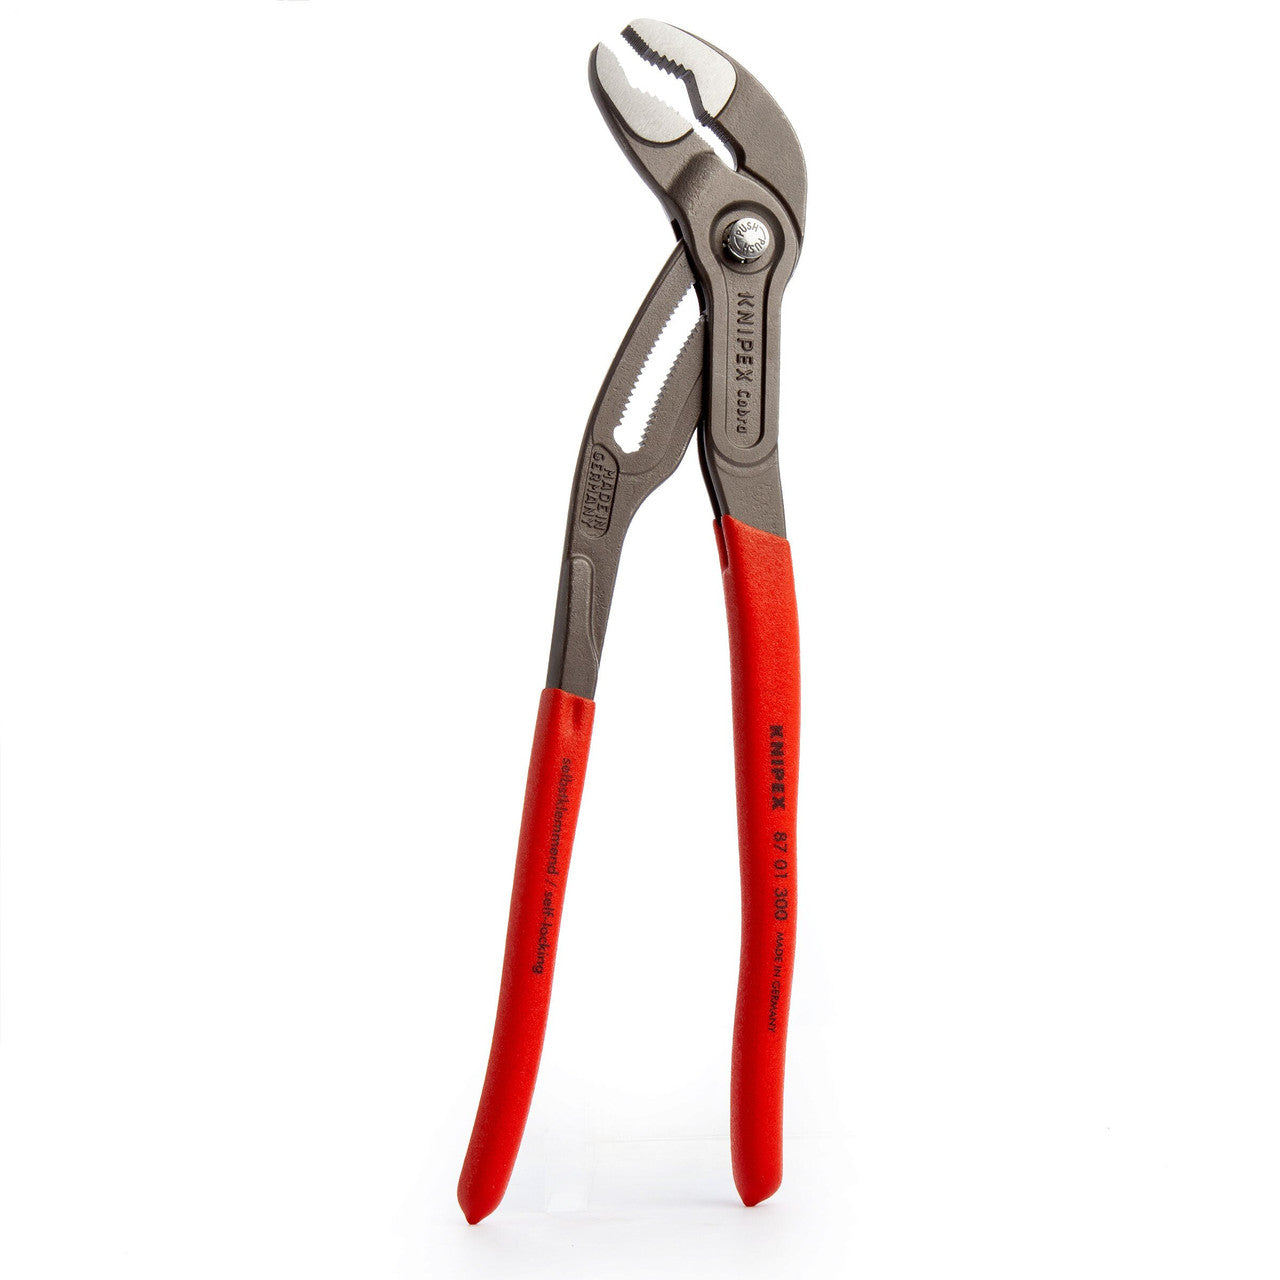 Knipex 8701300SB Cobra Pipe Wrench / Water Pump Pliers 300mm